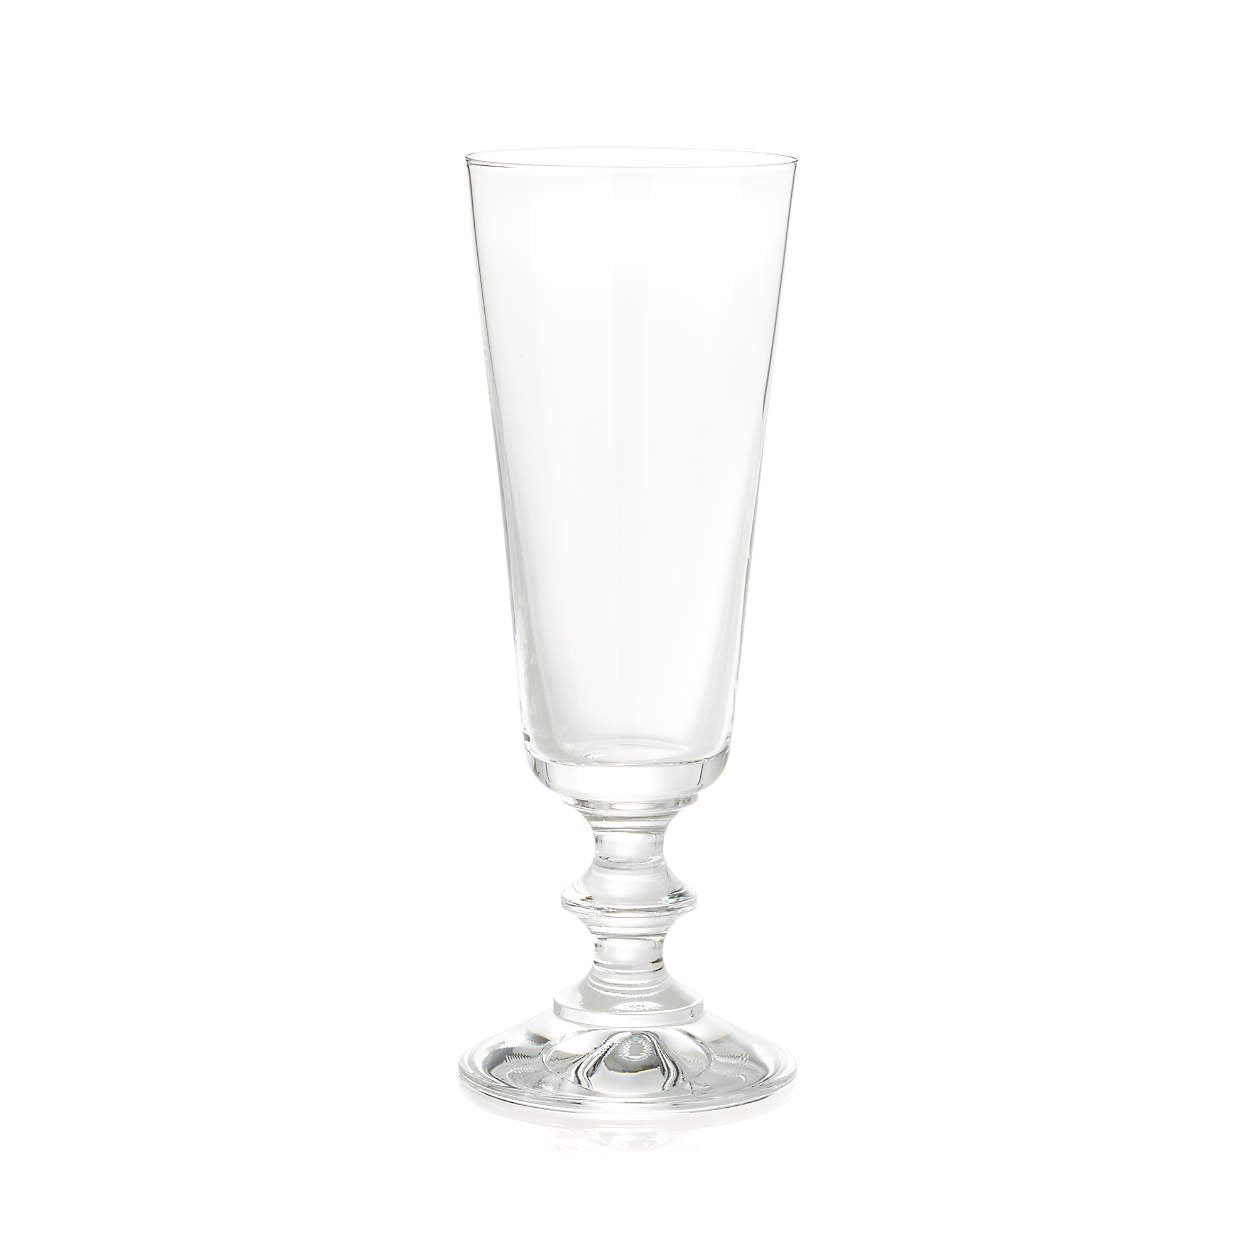 French Drinking Glass Rental